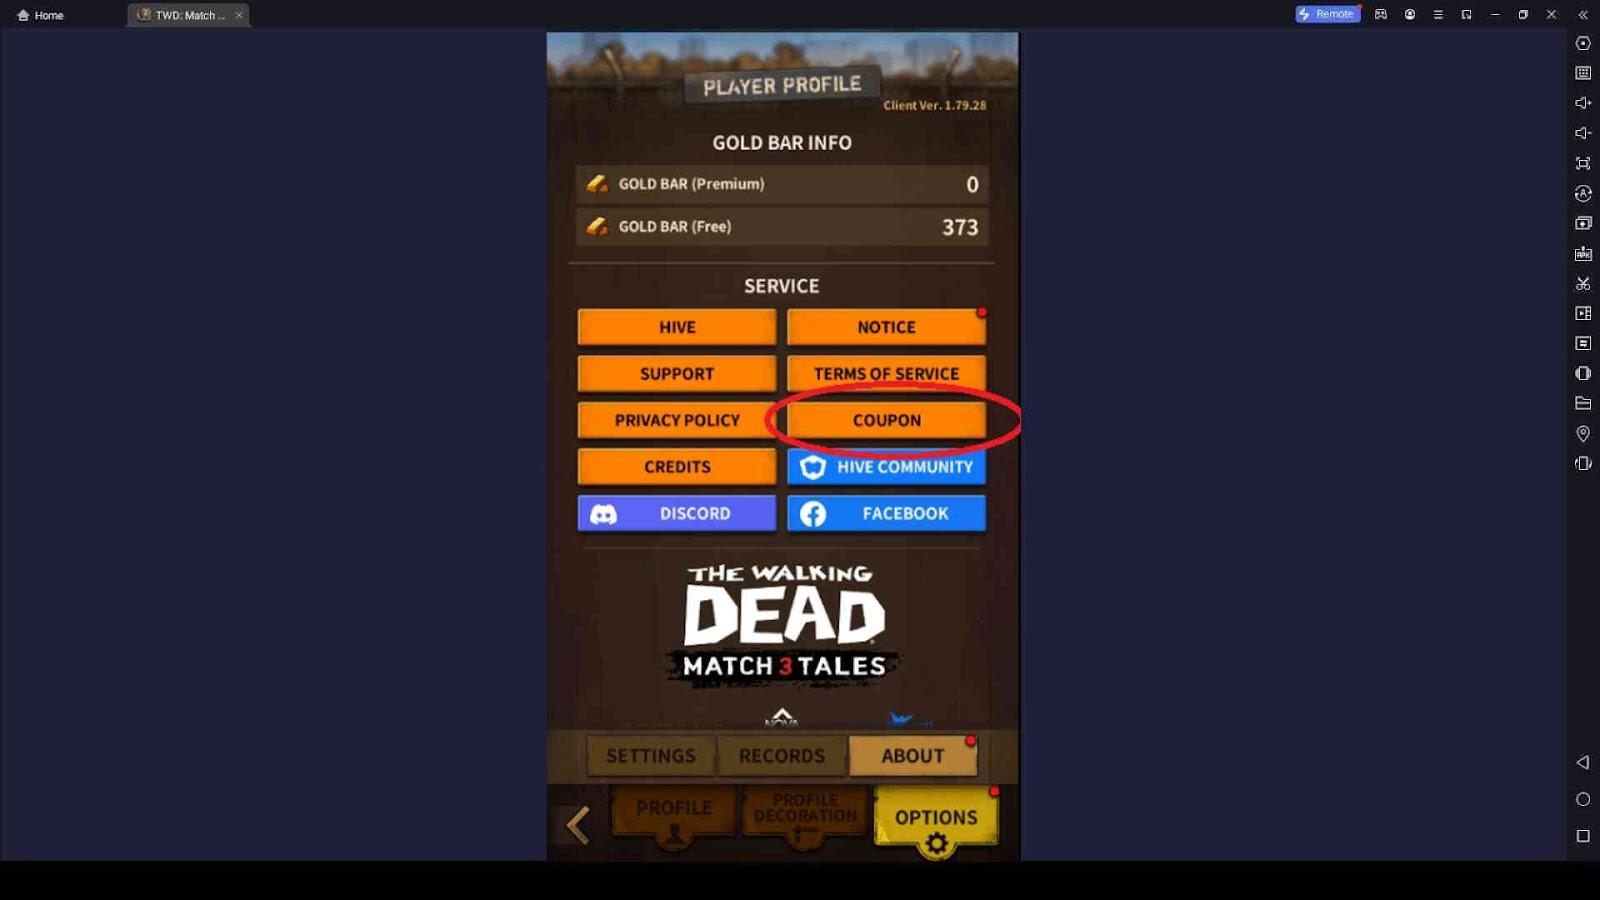 Redeeming Steps for The Walking Dead Match 3 Tales Redeem Codes